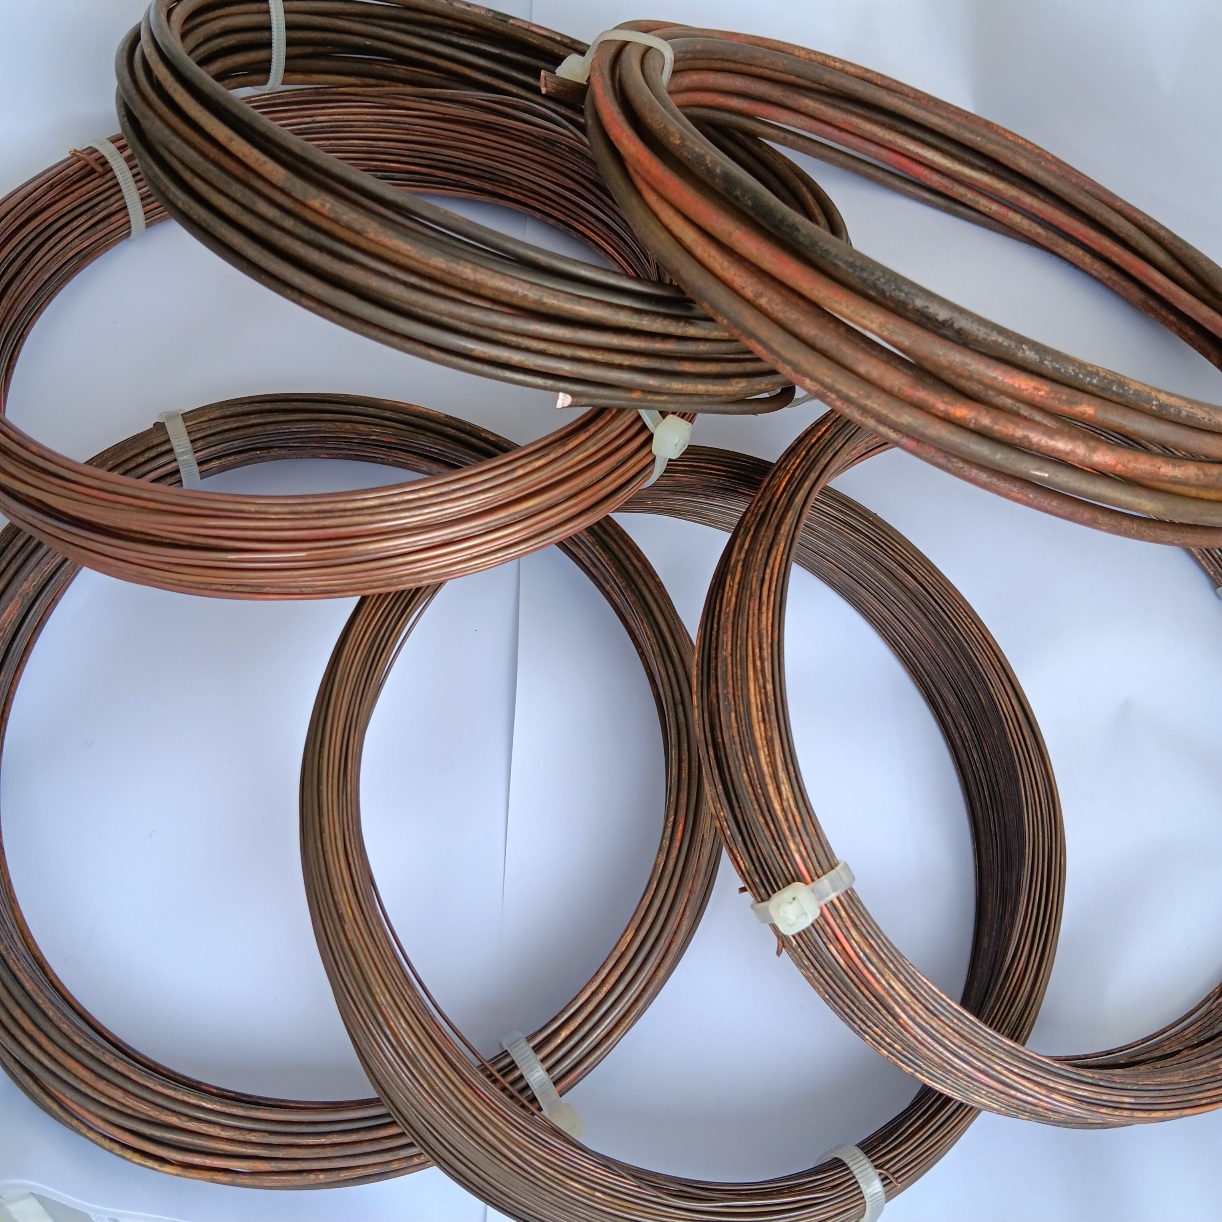 0.8mm SOFT PATINATED/OXIDIZED COPPER WIRE 500grams